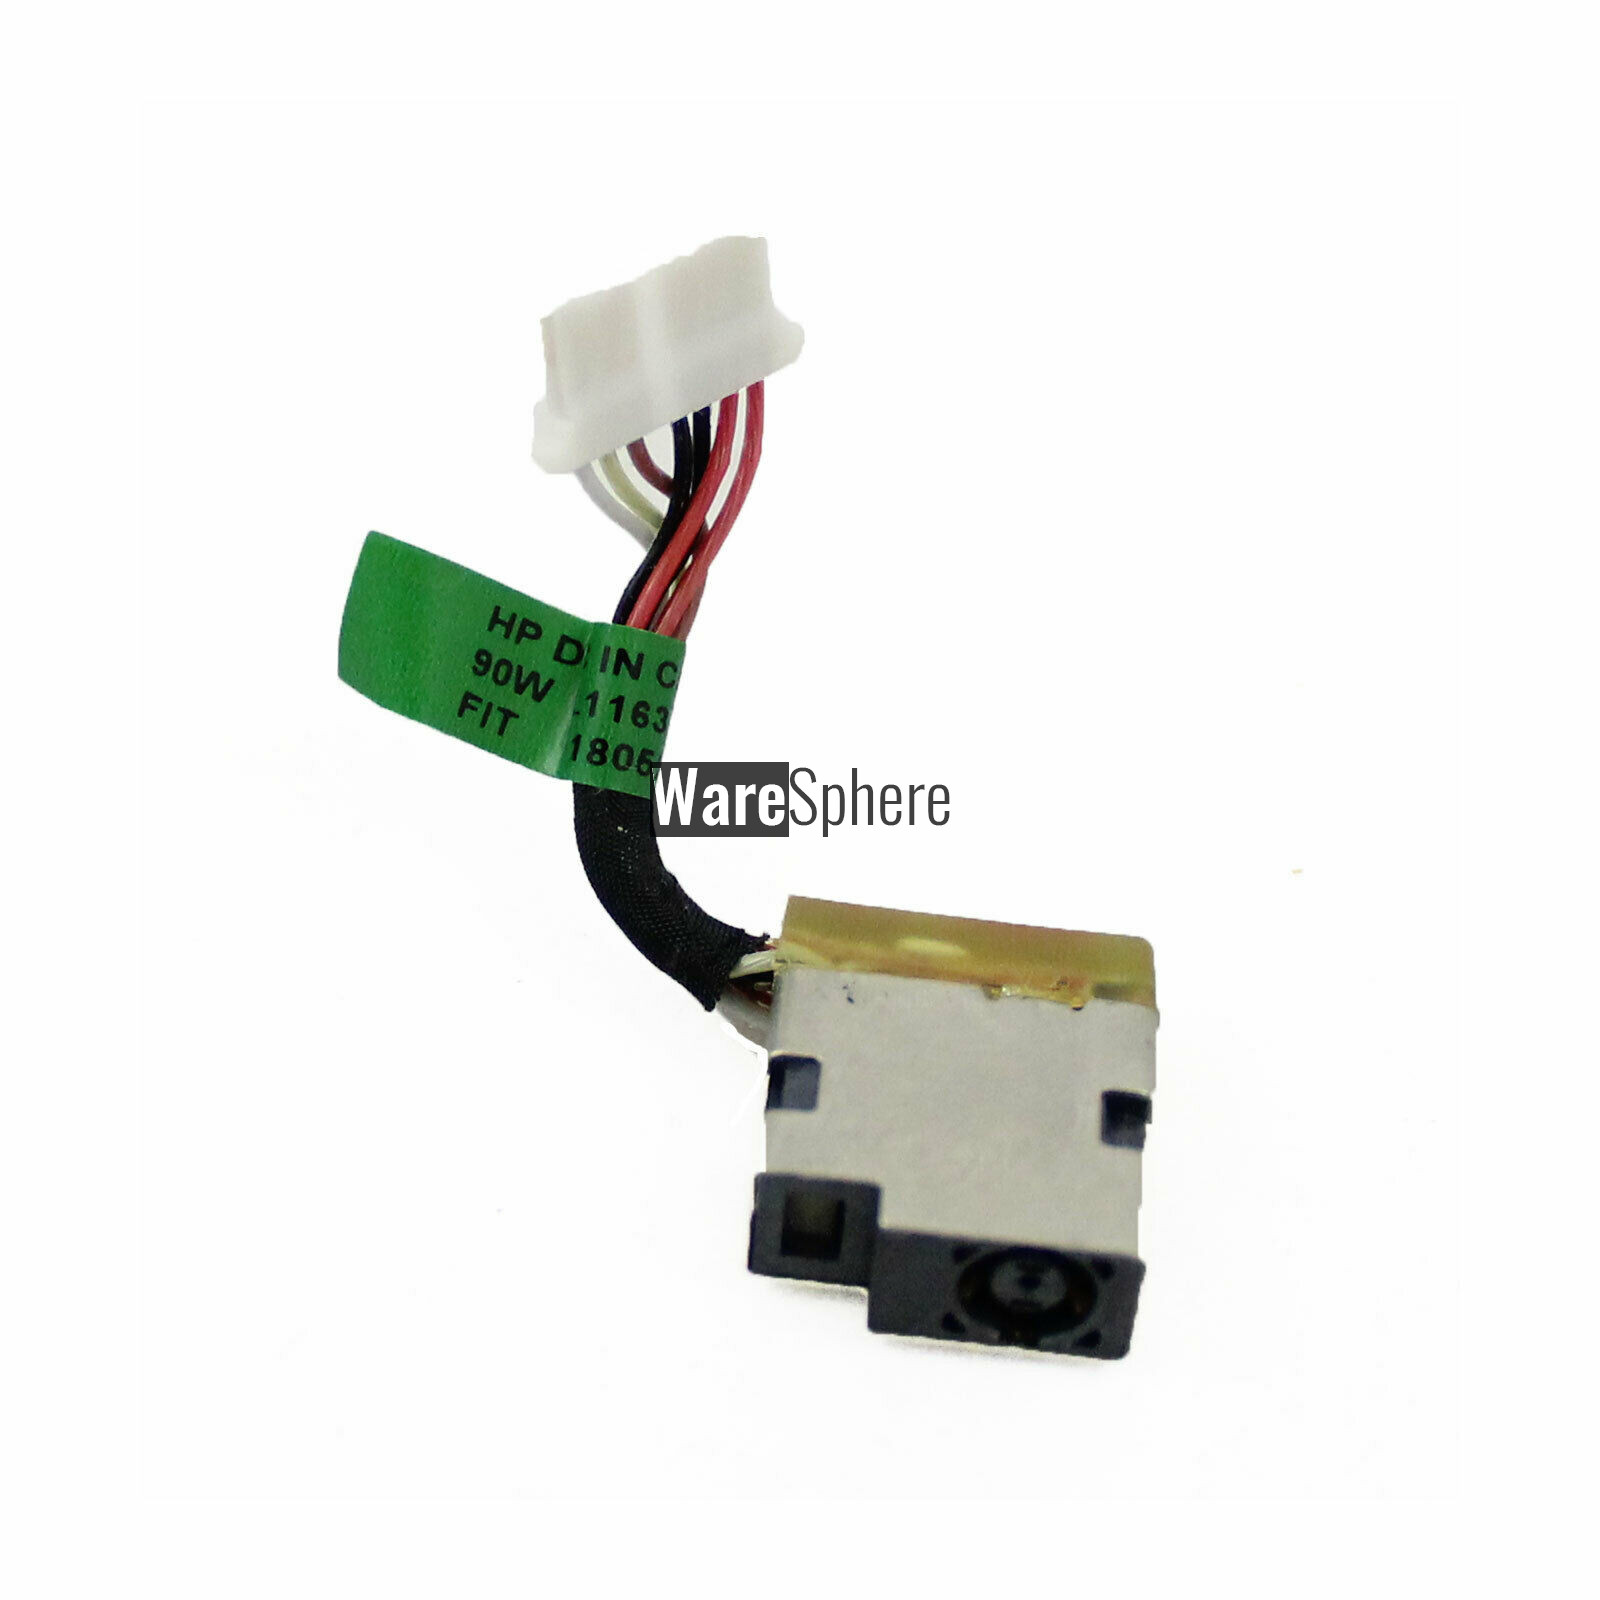  DC-IN Power Jack Connector for HP Pavilion X360 14-cd005ns Series L11631-Y25